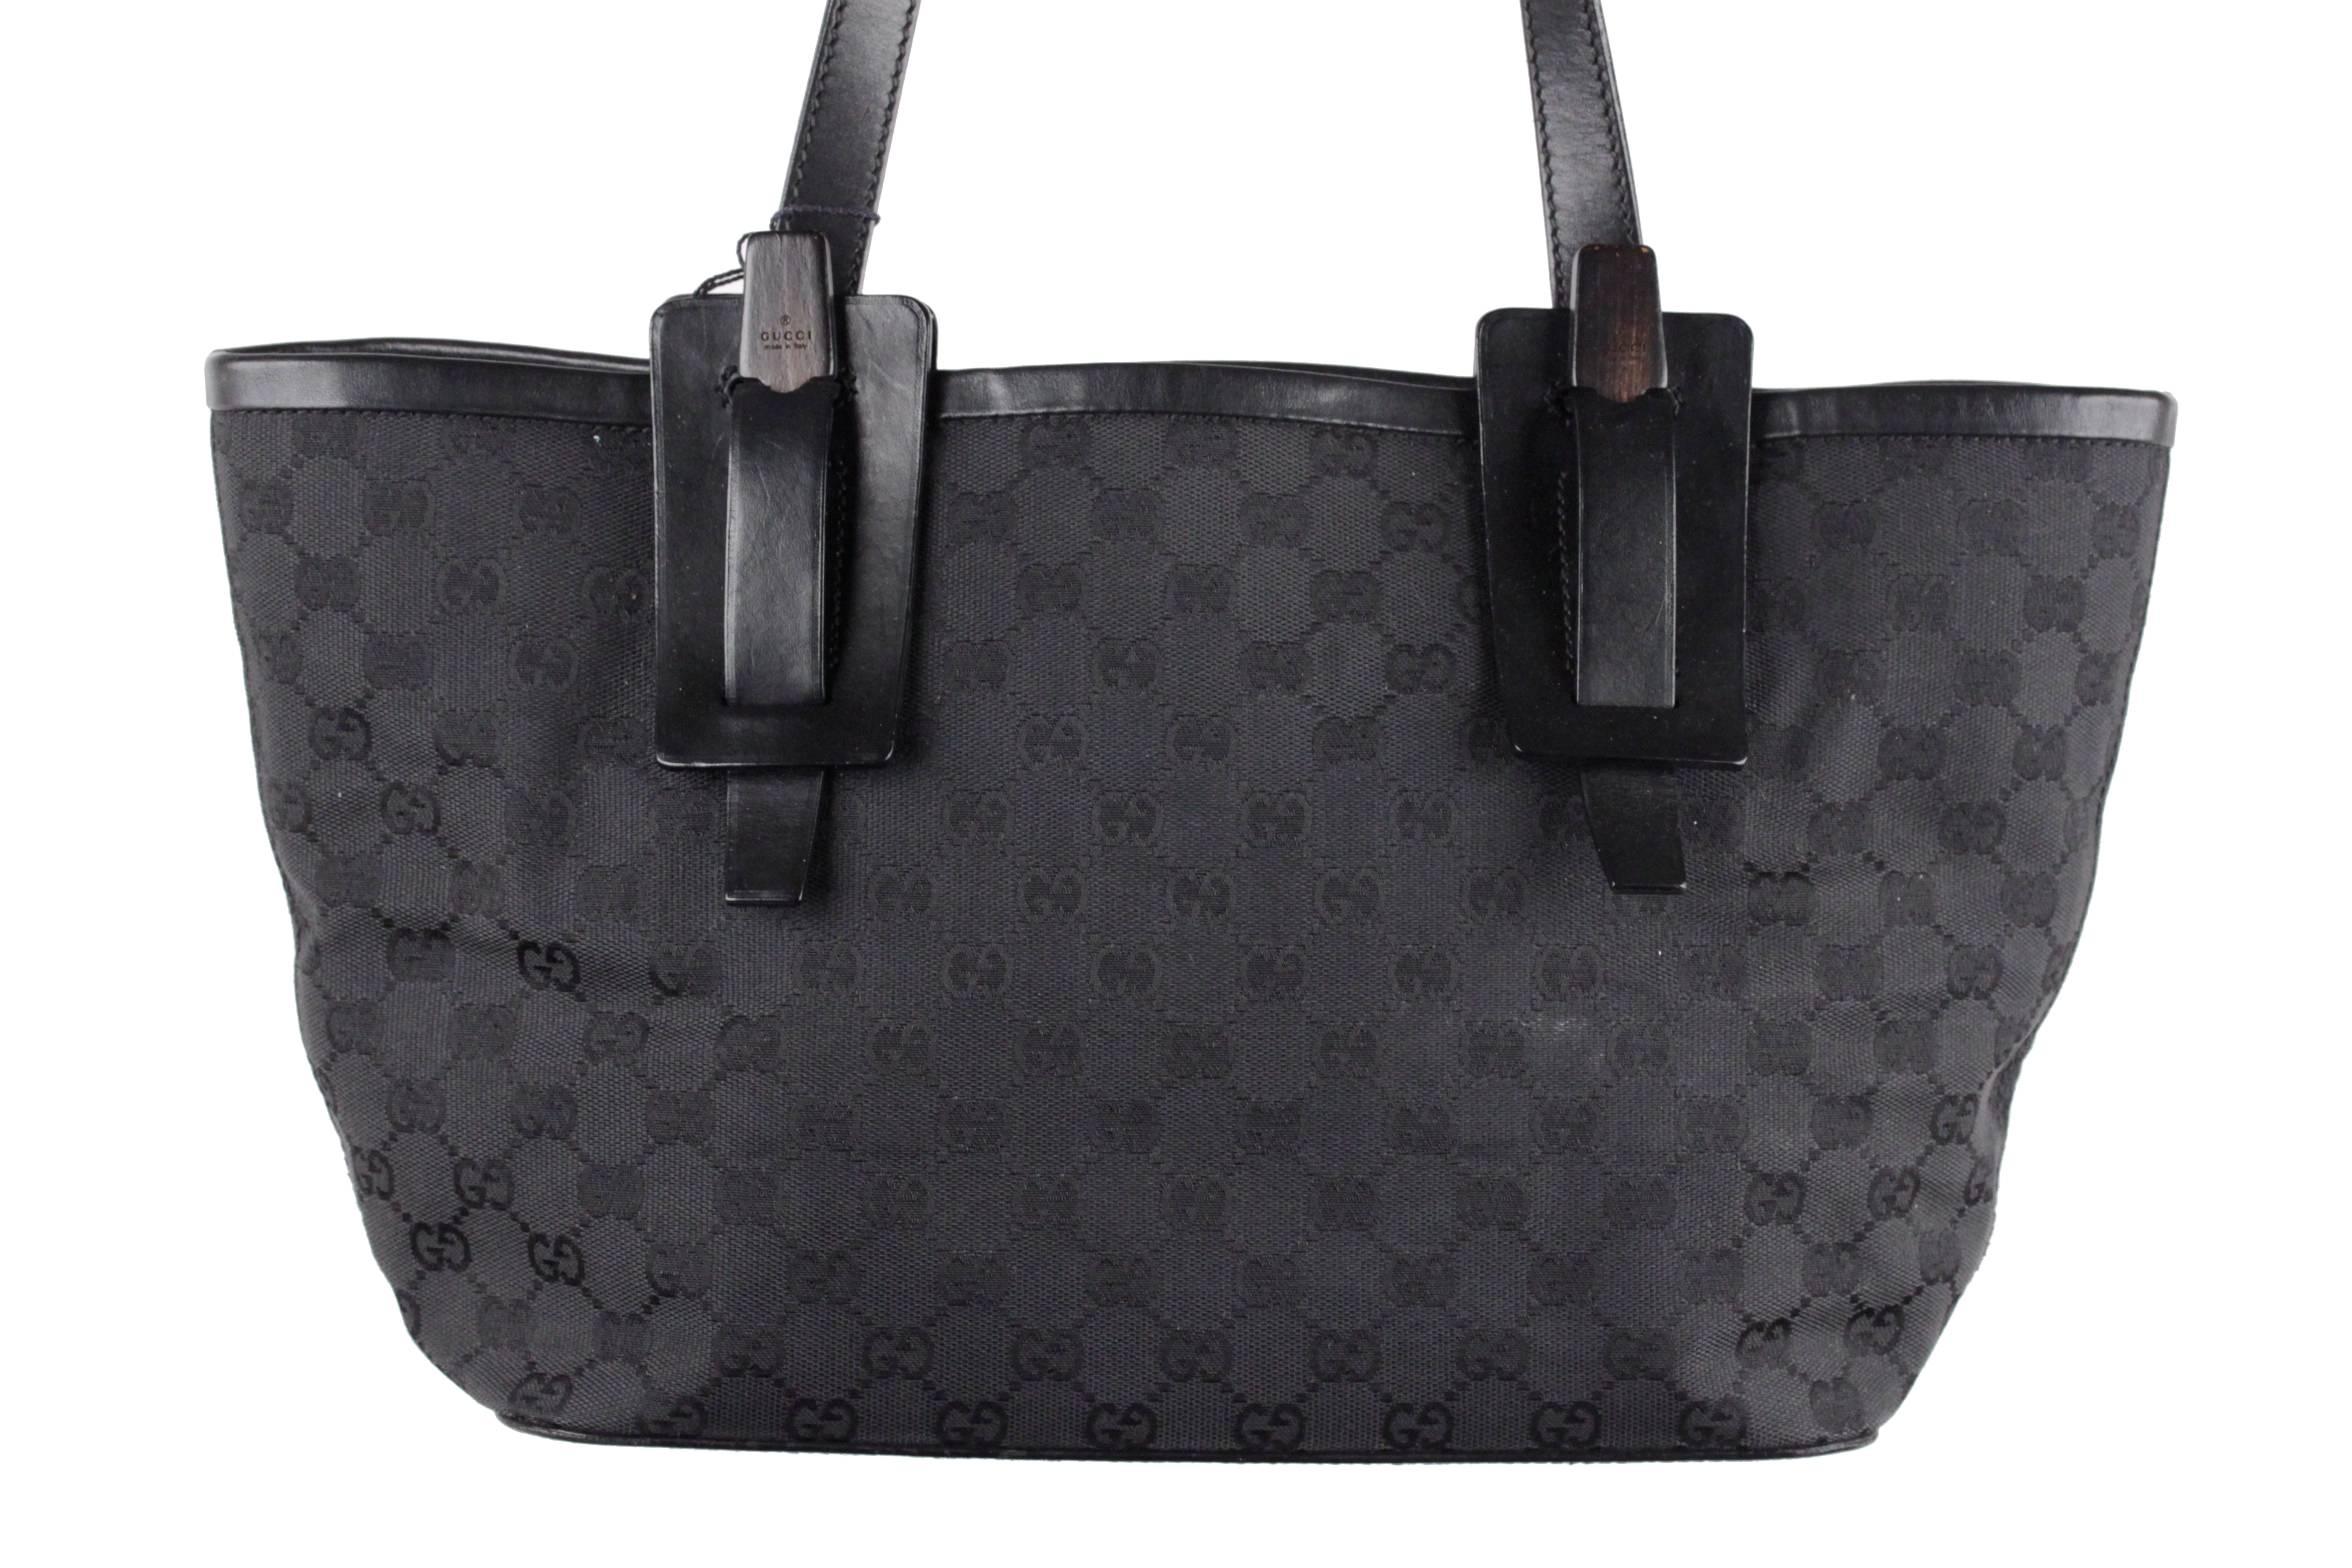 
- Crafted in black GG monogram canvas with leather trim
- Wooden pieces with GUCCI logo where the strap attache
- Black canvas lining
- 1 side zip pocket inside
- Open top
- Approx. measurements: 8 3/4 x 16 1/2 x 4 1/2 inches - 22,2 x 41,9 x